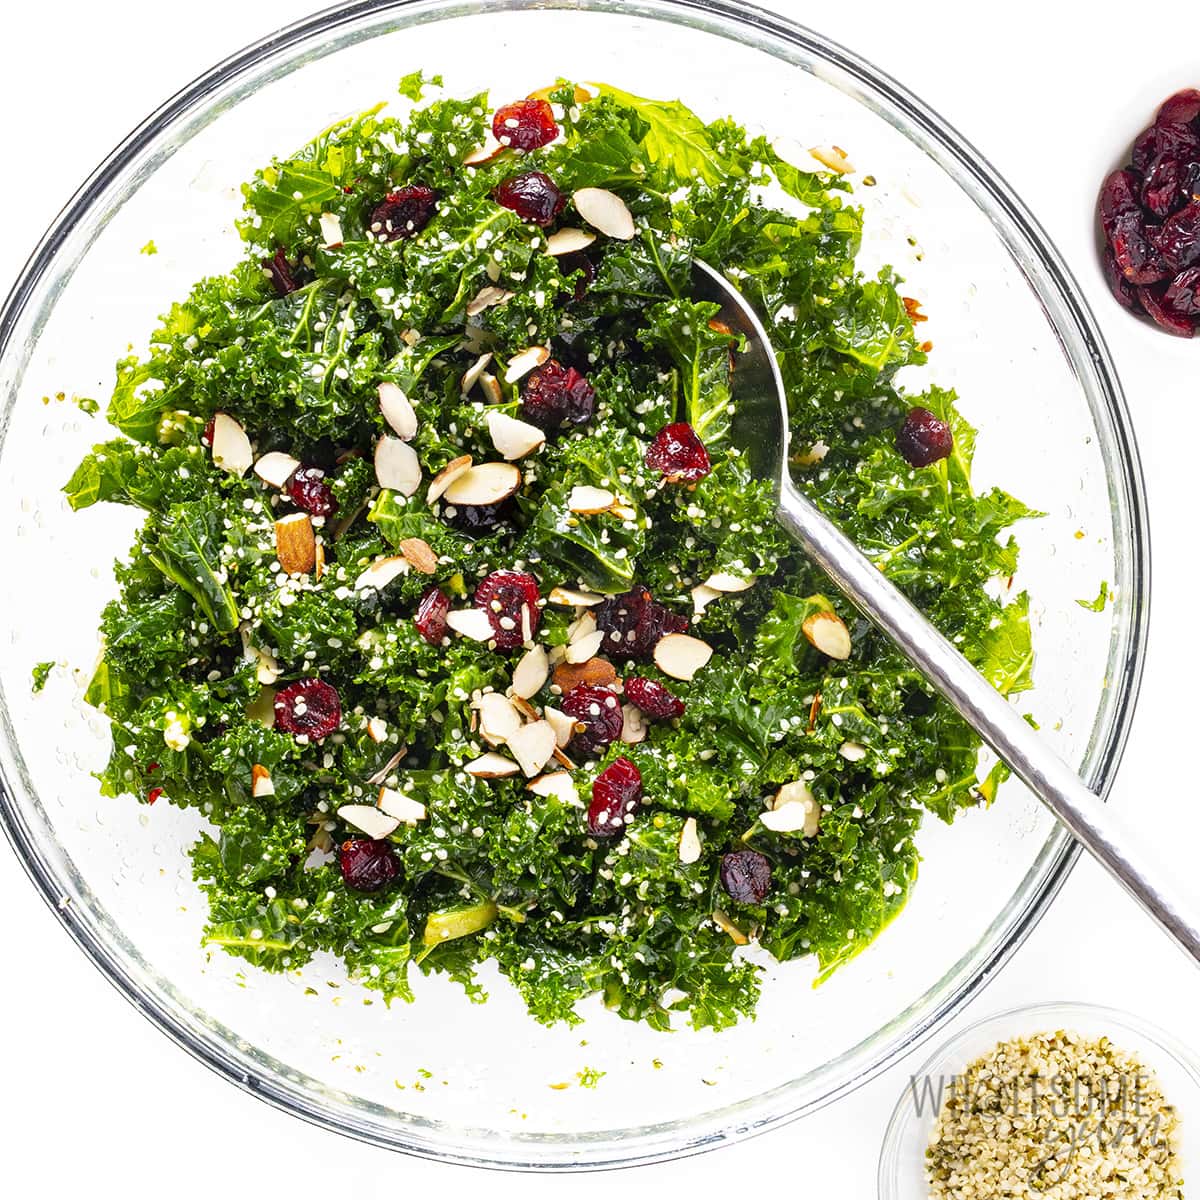 Finish the kale salad recipe in a bowl.